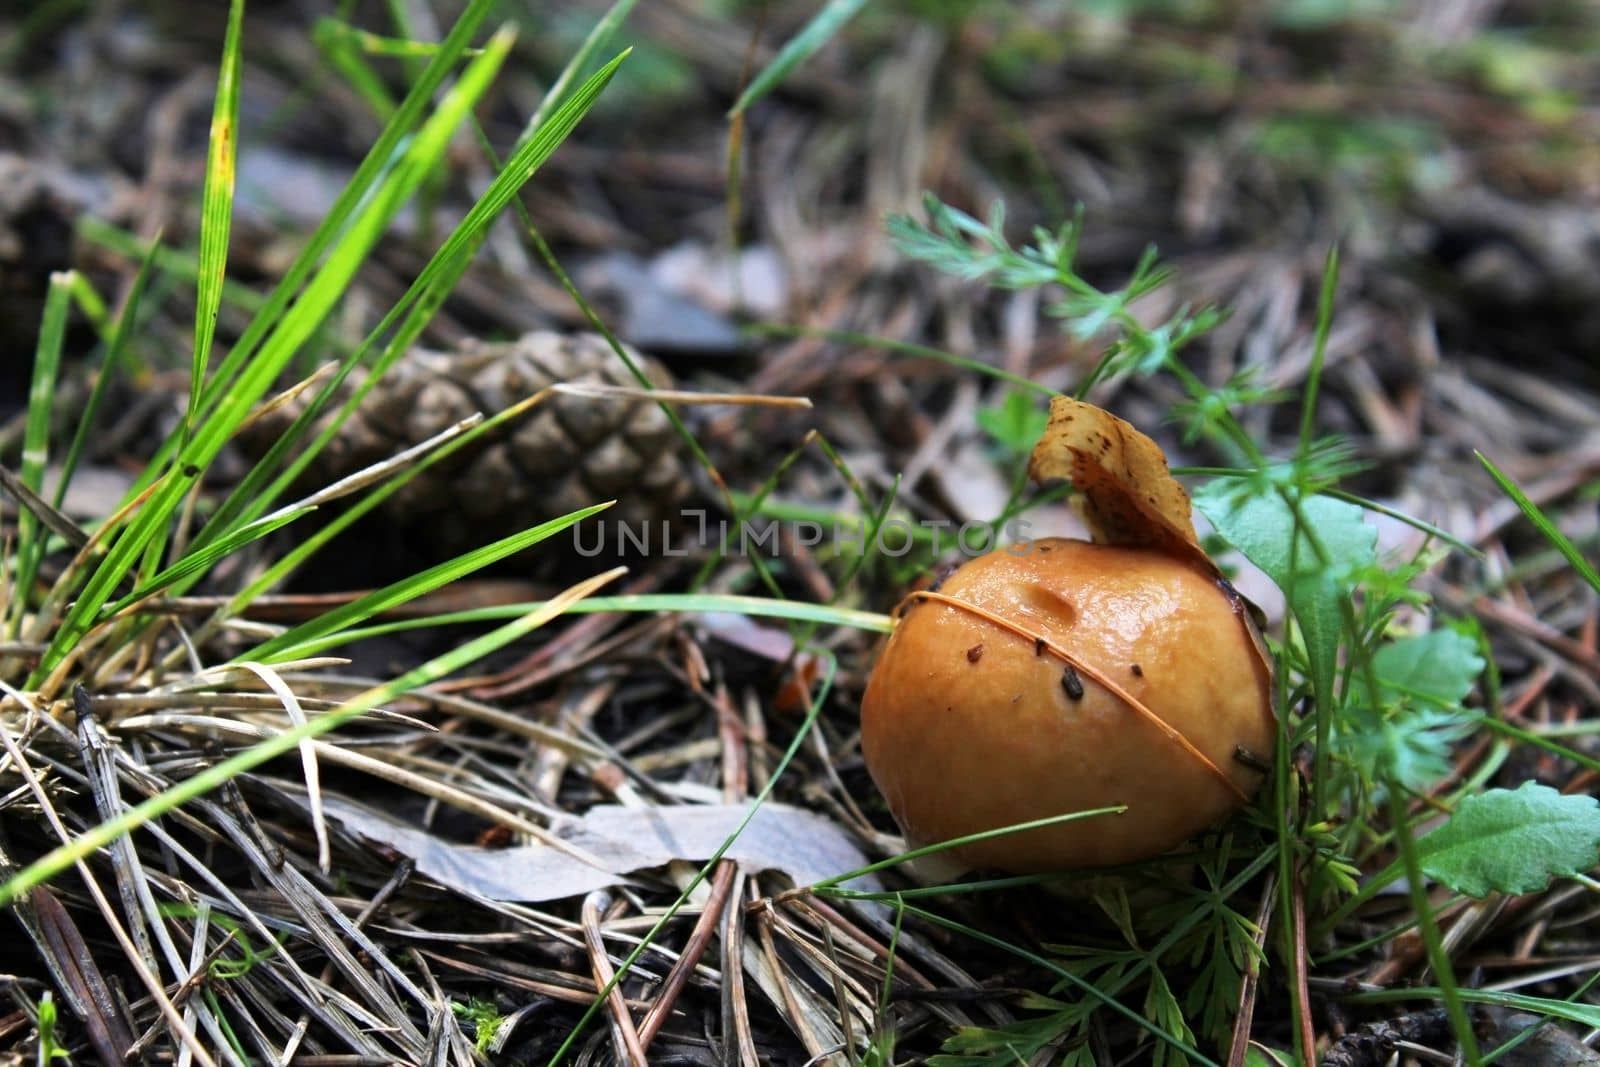 Small mushroom covered with a leaf, close-up in the forest. Natural landscape.